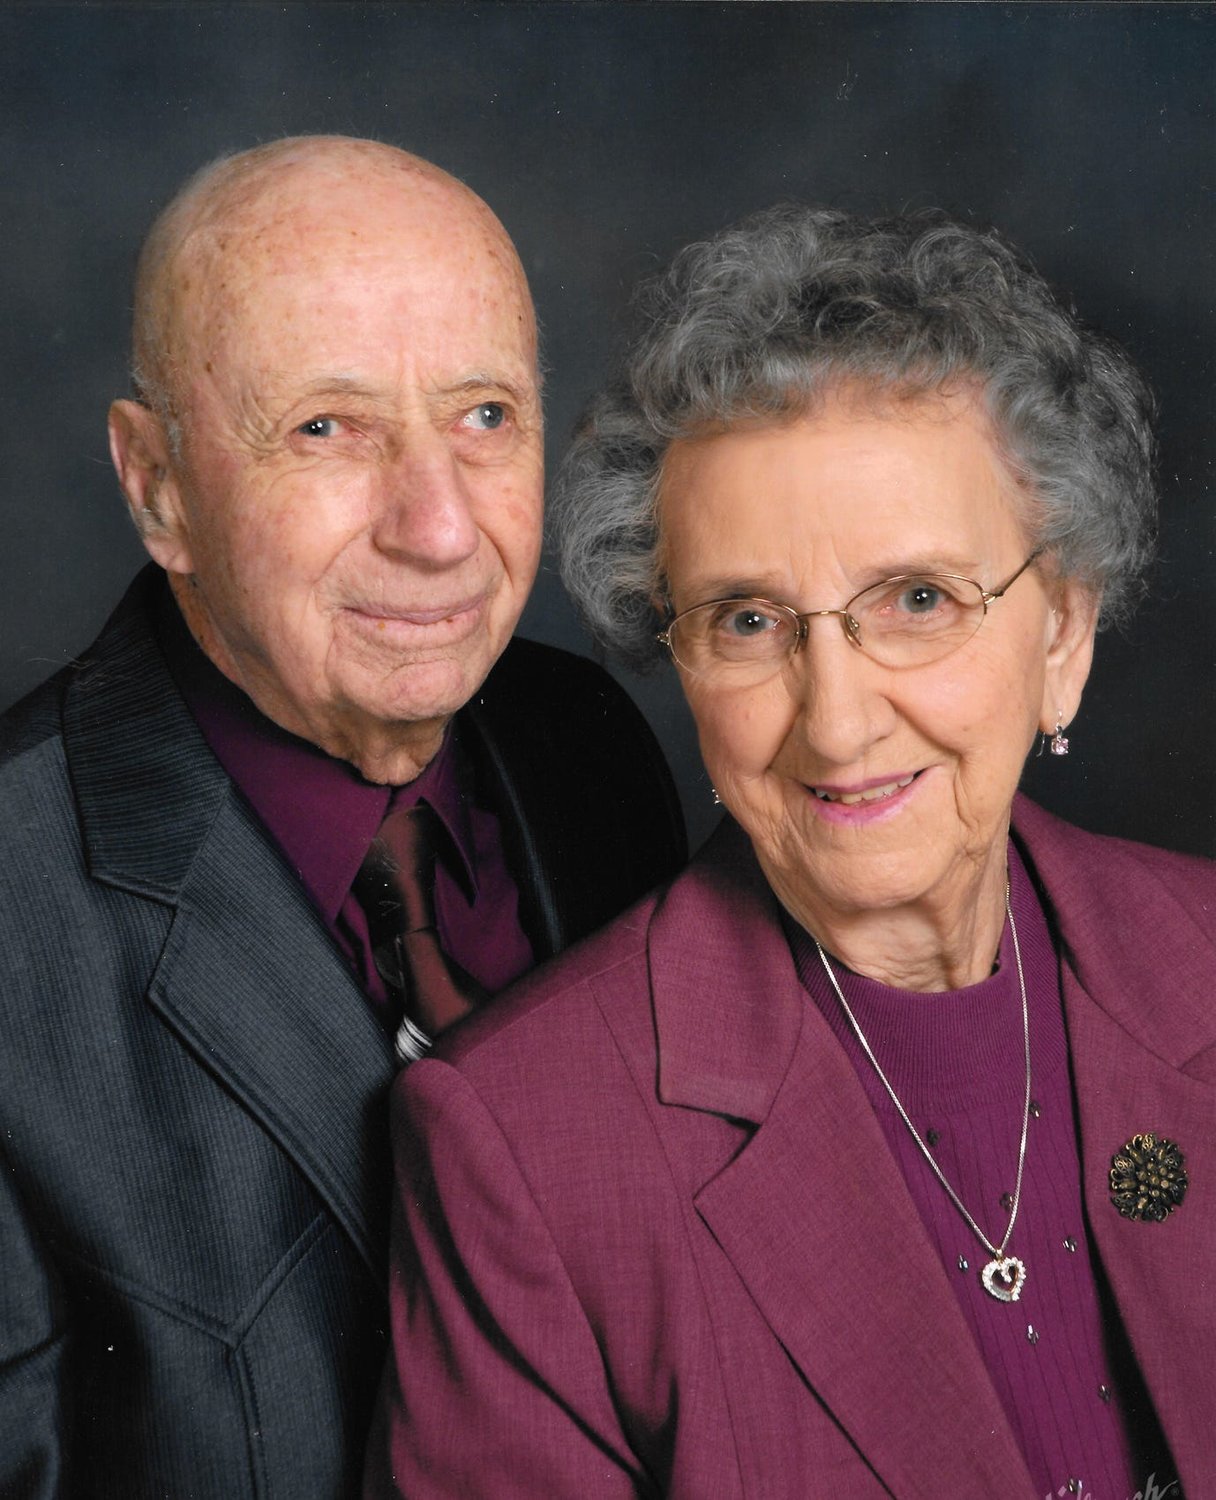 Fred and Marjorie Giefer celebrated their 75th wedding anniversary this week on August 10.